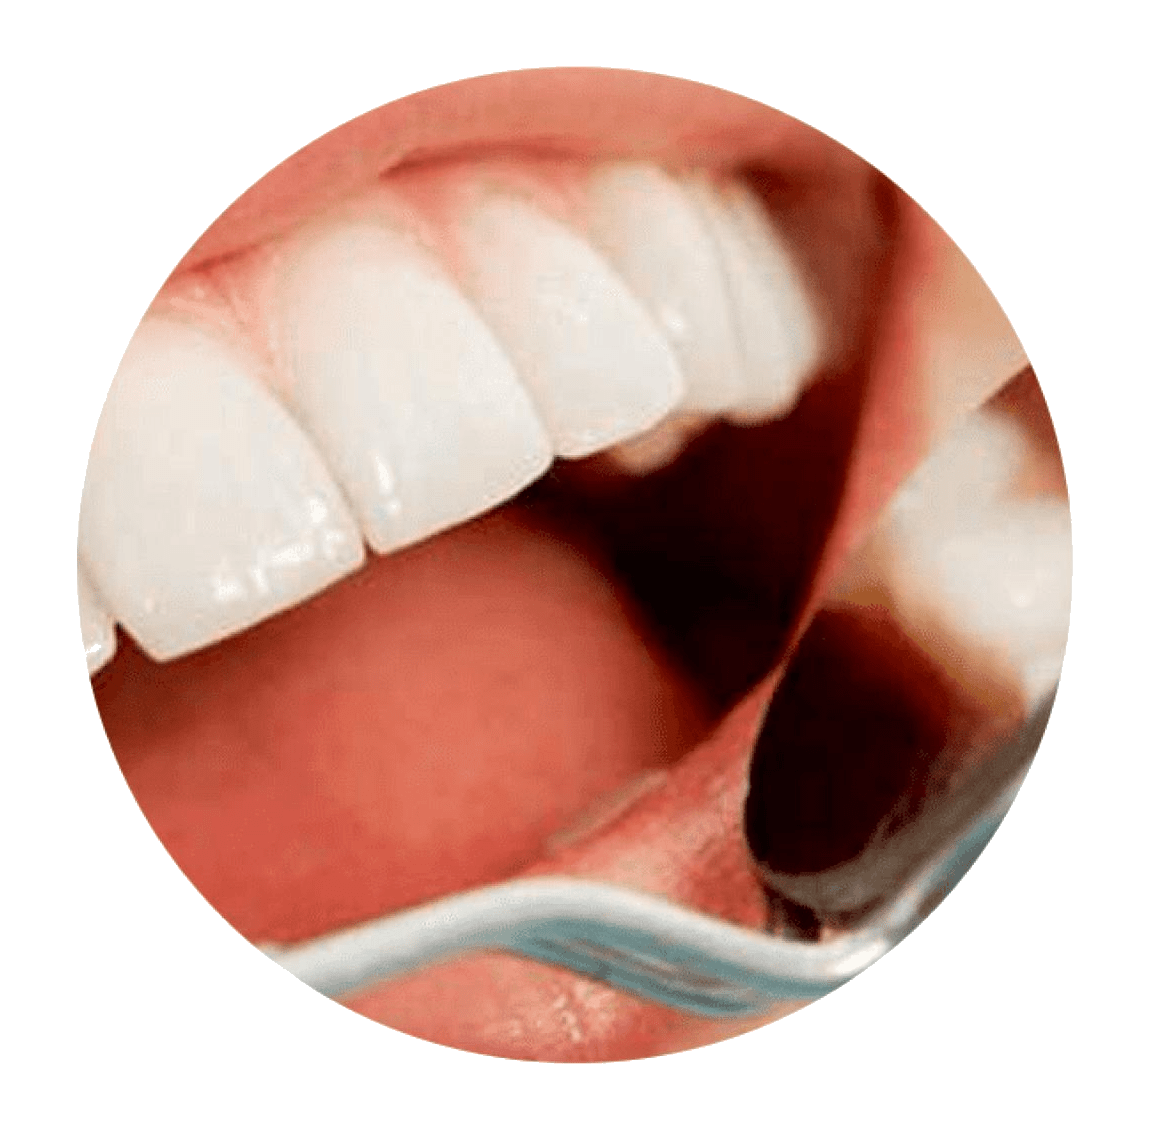 What is the connection between oral health and general health?